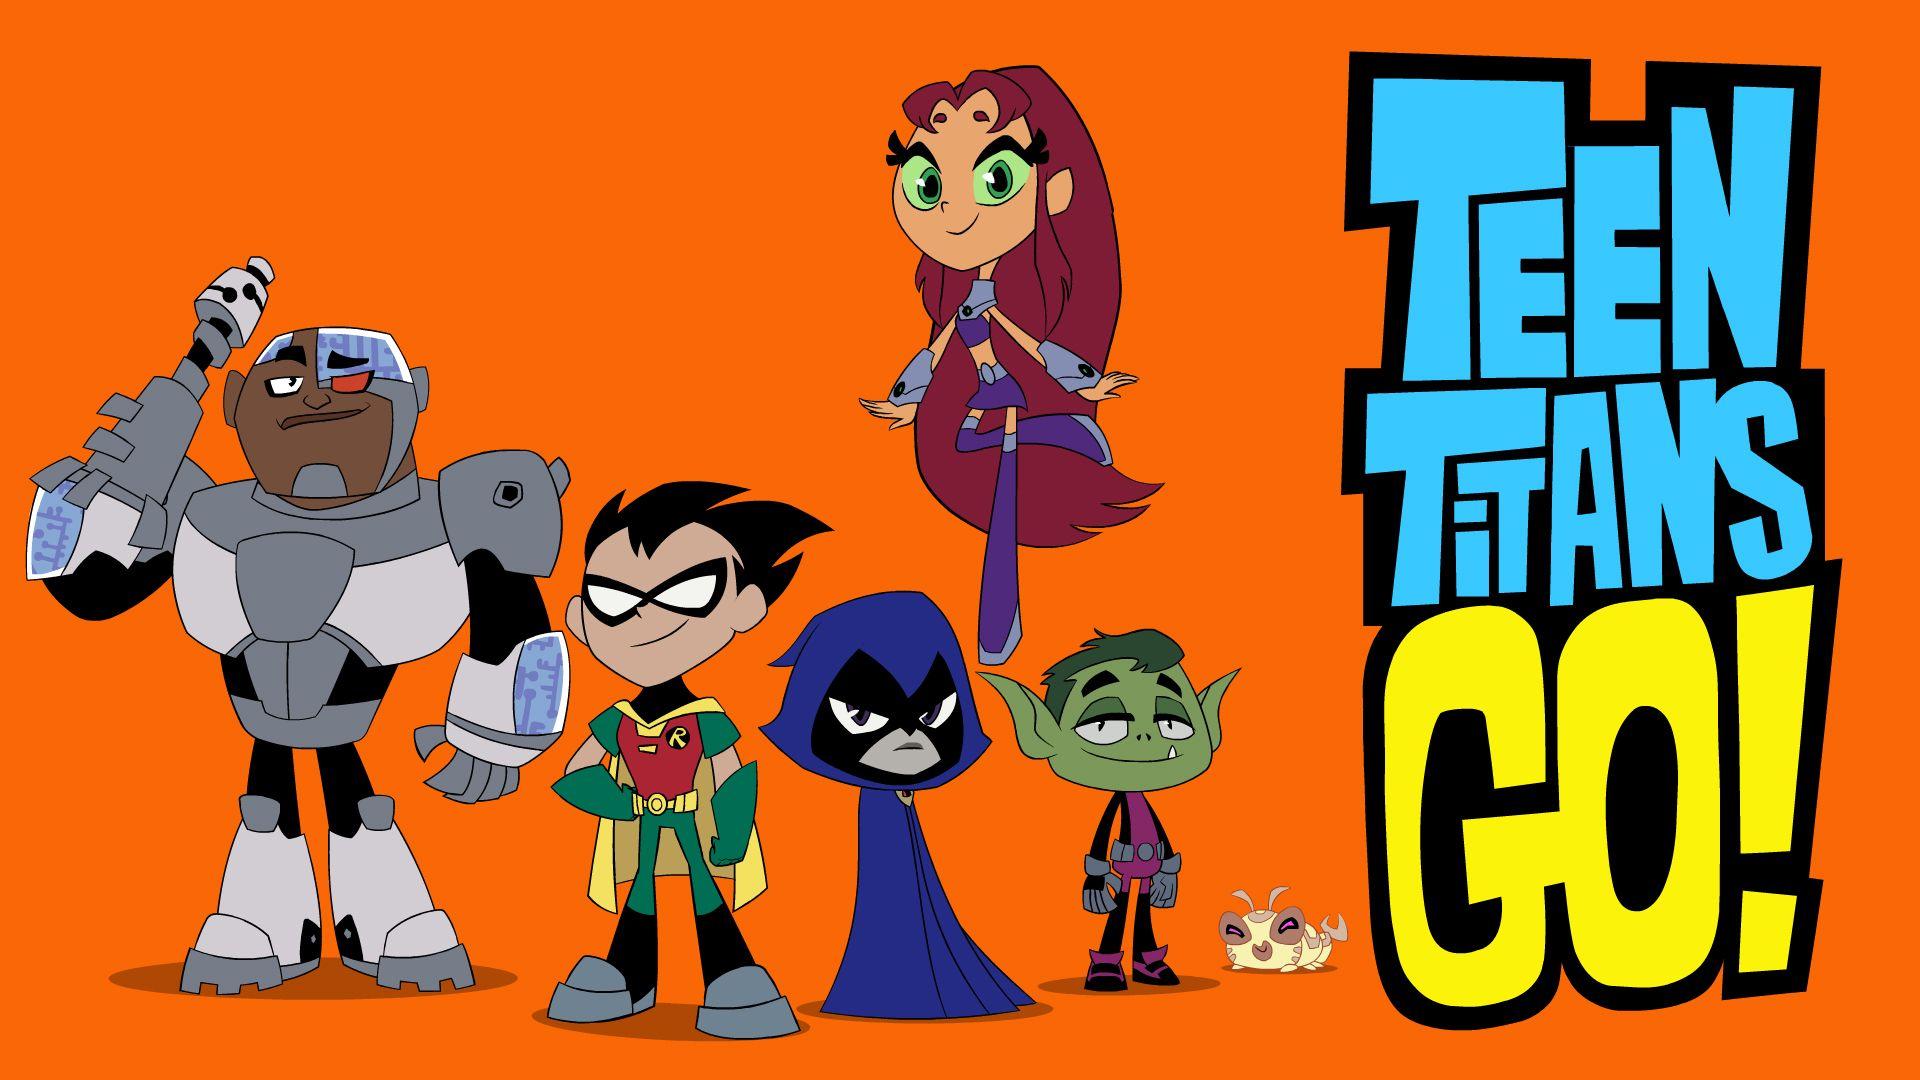 most watched of the week (entertainment): Teen Titans Go